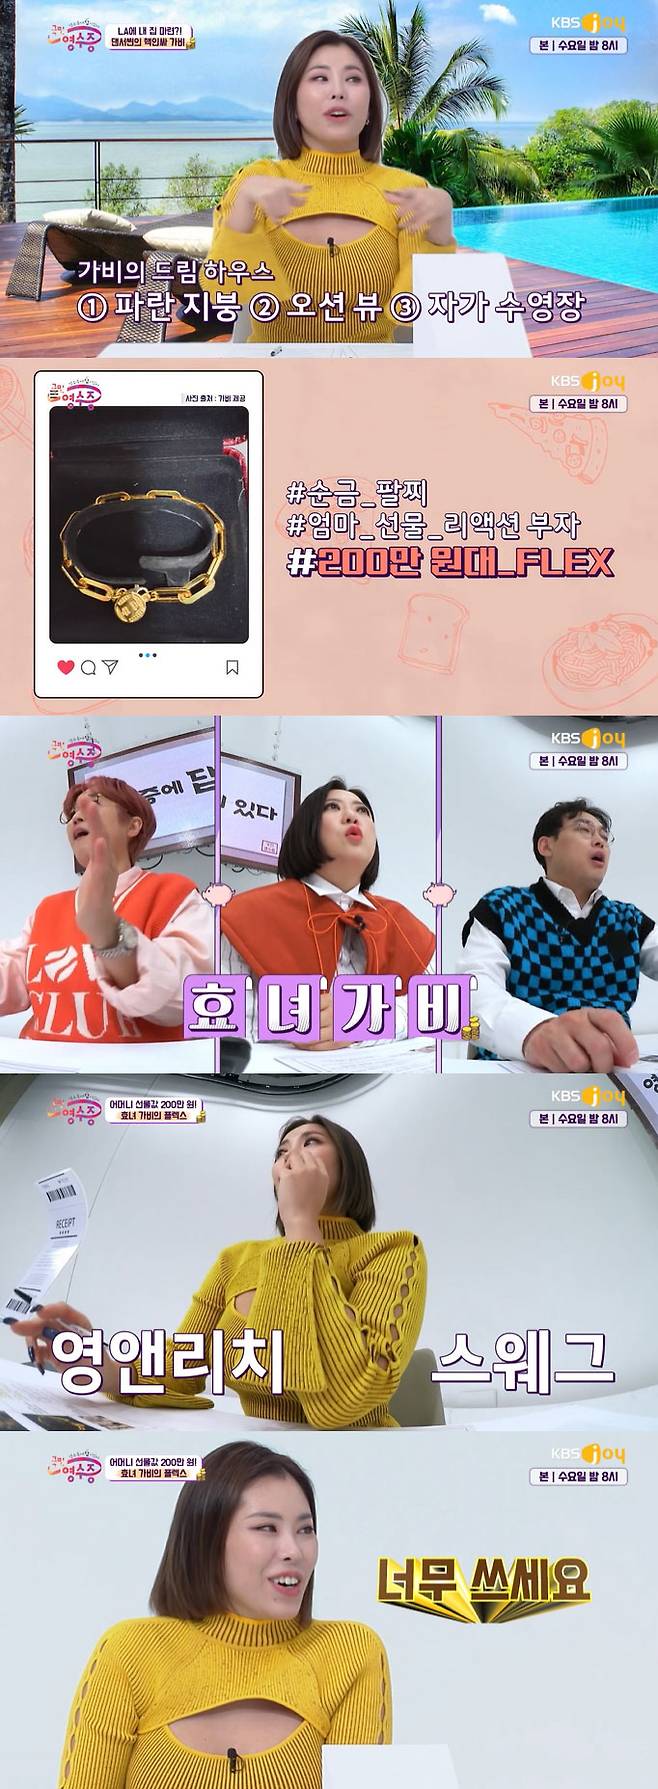 In the 25th KBS Joy entertainment program National Receipt broadcasted at 8 pm on the last two nights, 3MC Song Eun-yi, Kim Sook and Park Young-jin analyzed the receipt of Dancer GABEE.I havent forgotten my three-month Los Angeles (hereinafter referred to as Los Angeles) life when I went to learn to dance, GABEE said on the day.I do not have my house in Korea yet, but I want to have my house in LA someday. So Song Eun-yi was fortunate to say, I have recognized the price of houses near Malibu Beach for GABEE. He added, It is 20 billion.In addition, GABEE has attracted attention by reporting that its underground agency has expanded to the third floor of the ground due to the popularity of SUfa.There was a practice room underground, a small office in that underground practice room, and now there are our companies on the third floor of the same building, he said.GABEEs receipt, which was released soon after, attracted attention because it contained various daily life, from vertical rise income to CEO and life as a YouTuber after appearing in the dance entertainment Street Woman The Fighter (hereinafter referred to as SUfa).In particular, Song Eun-yi was asked by Kim Sook, Is it a stalker?, Knowing most of the GABEE YouTuber videos.GABEE also showed off a young and Richie swag, saying he had presented a 2 million won pure gold bracelet. I gave it to my mother for her birthday.In fact, there was a little smaller bracelet with the same design as that, but my mother kept touching expensive ones.My mother was so happy to receive a gift, she said, I am young children and I am old. She laughed. My mother is so good at reacting.For example, if I buy something, I like it too much, not Thank you but Oh, what the hell.I was proud to buy a bracelet in a gold silver room, saying, Its good to have a daughter and Its the best. He surprised the crowd by saying that he gave me a credit card after the gold bracelet gift.He added, I told you to write it as much as you like. Kim Sook said, Do your mother write cards?I asked and GABEE was frankly saying you spend too much, making everyone laugh.But Song Eun-yi, who leads the gag system Nuclear Insa, said, I think I can do it. I have eight meetings that do not overlap.365 days are busy, said Park Young-jin, who heard this, saying, I thought someone was nominated for Song Eun-yi. After all, Kim Kyung-pil and Jeon In-gu mentor said, The number of characters in the receipt is the level of the Three Kingdoms.I need to adjust my goals, and I hope there is a concept of pre-election. He encouraged me to reduce the meeting and save 50% of my income.The two also advised GABEEs LA House dream that Every time I go to a hotel, I can be new, When I get seed money, I buy my favorite house in Korea first. GABEE, who was struggling, accepted LA House dream will be closed for a while .